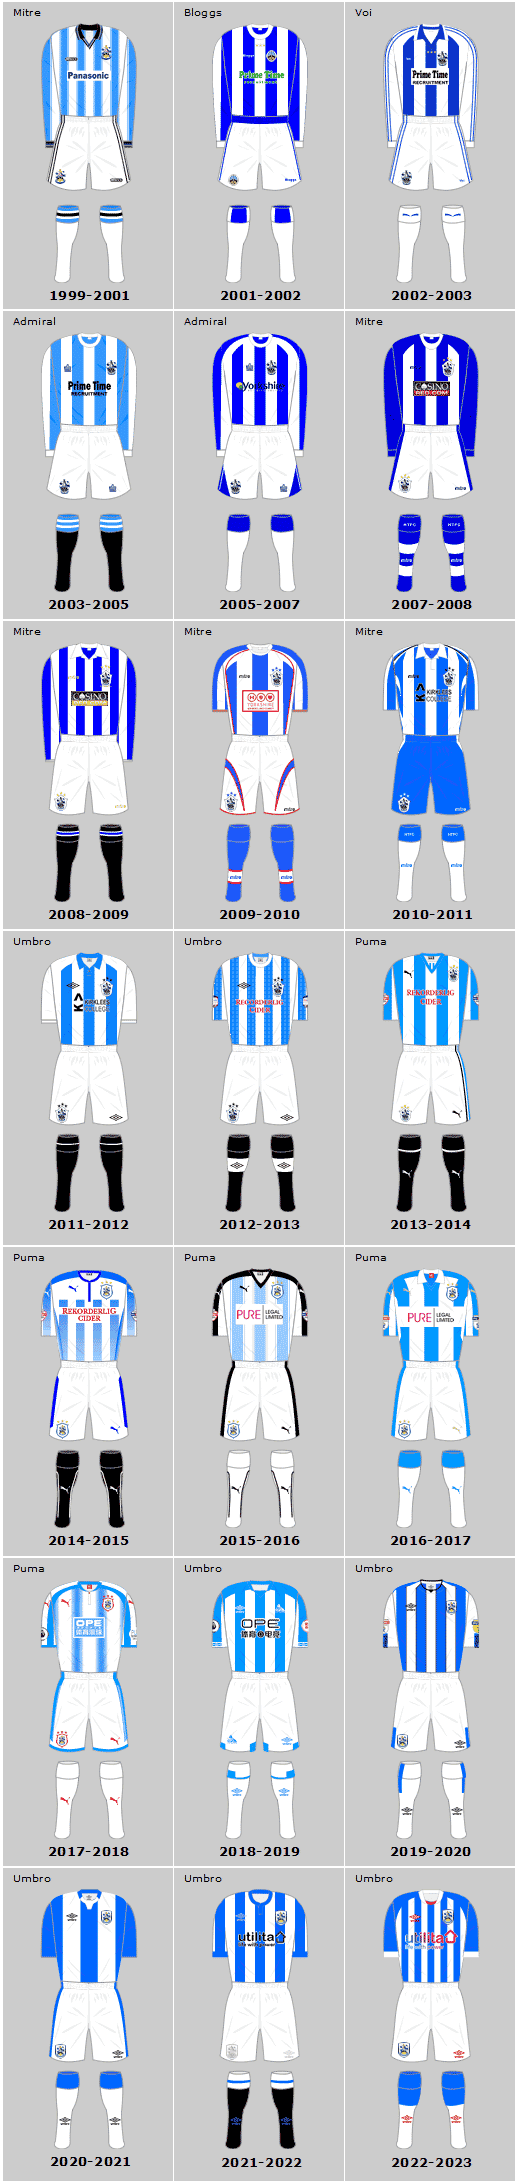 Huddersfield Town 21st Century Home Playing Kits